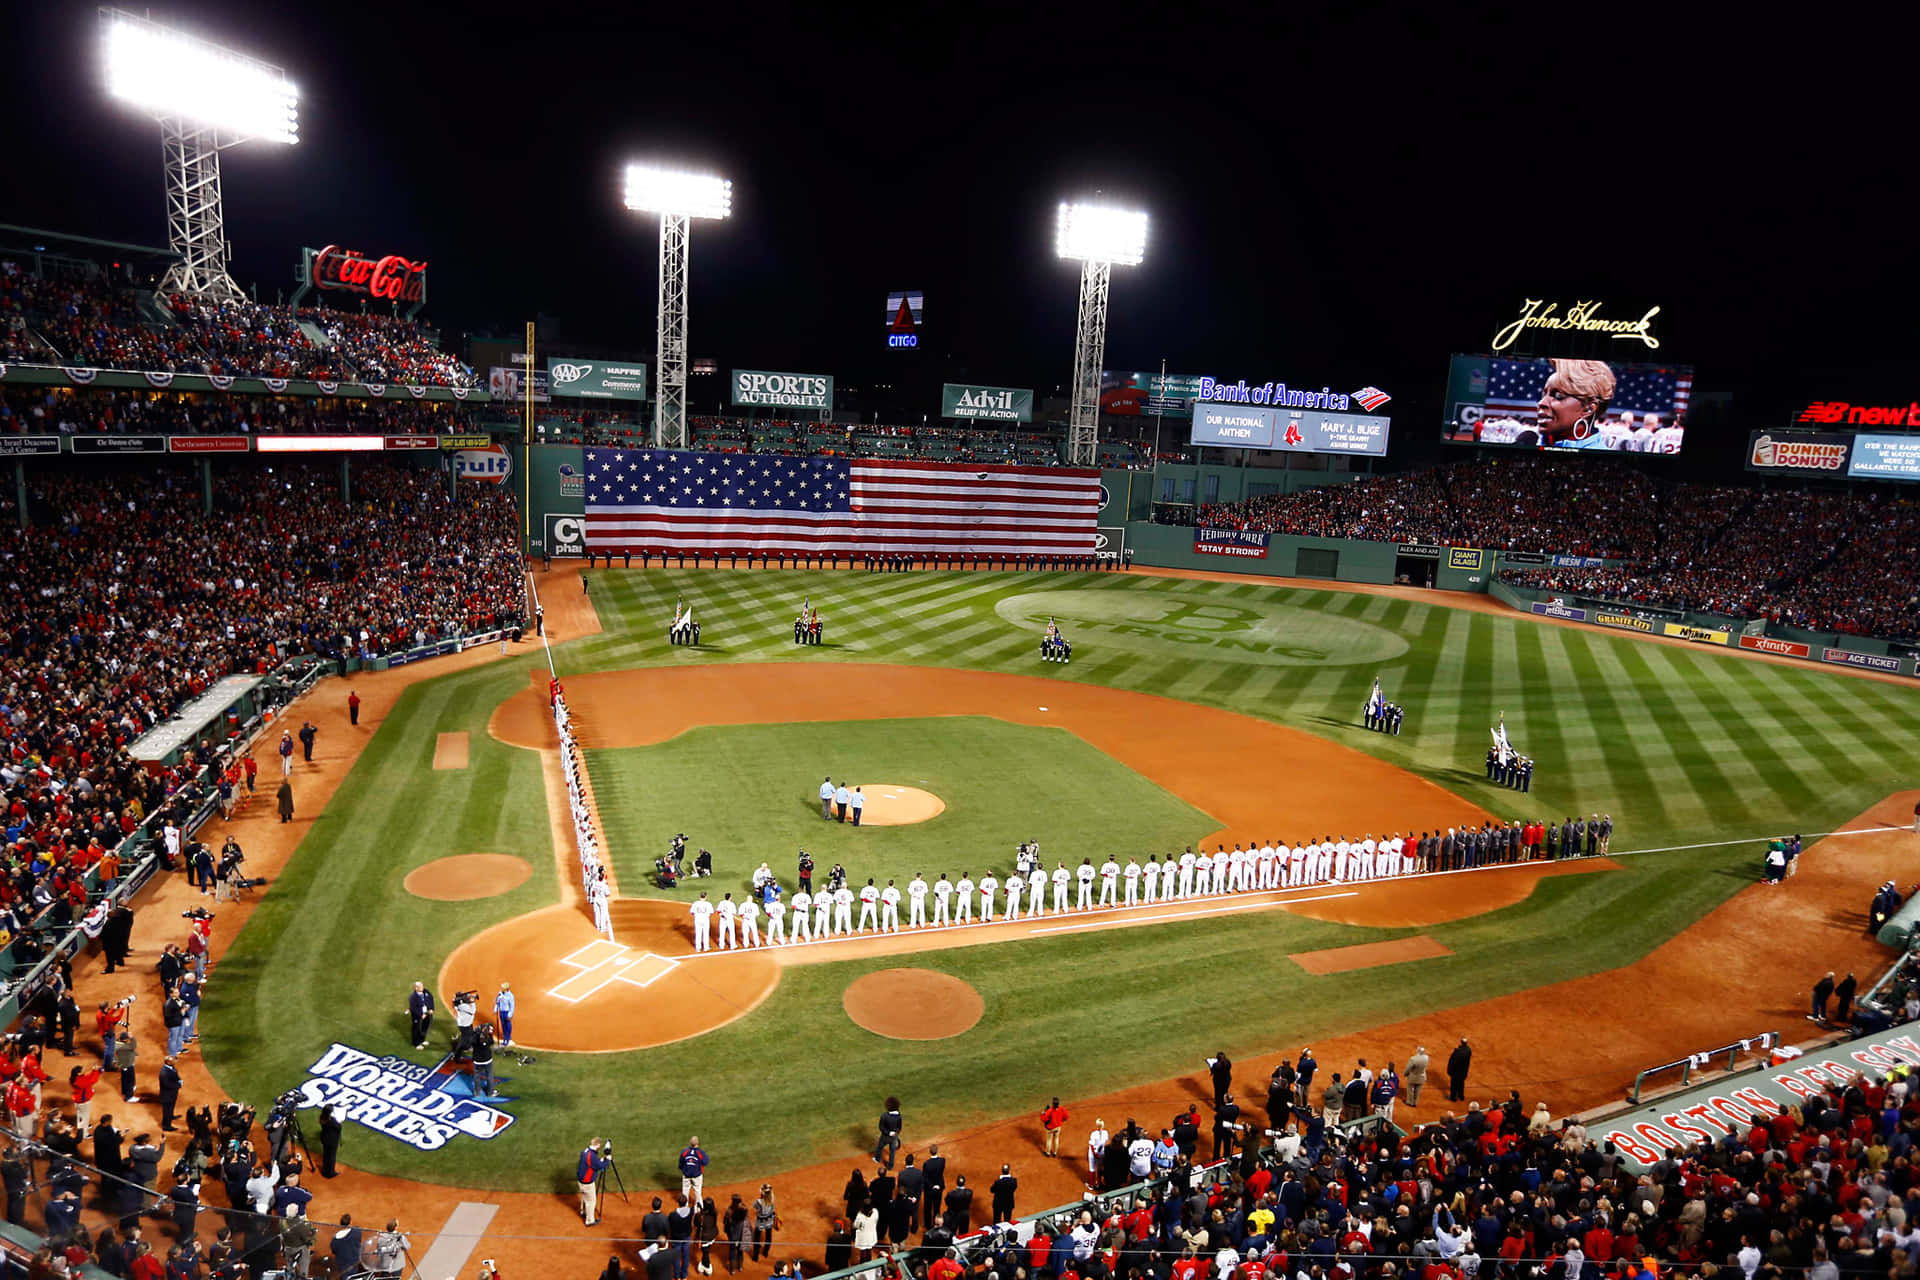 Take in the breathtaking views of the iconic Fenway Park. Wallpaper